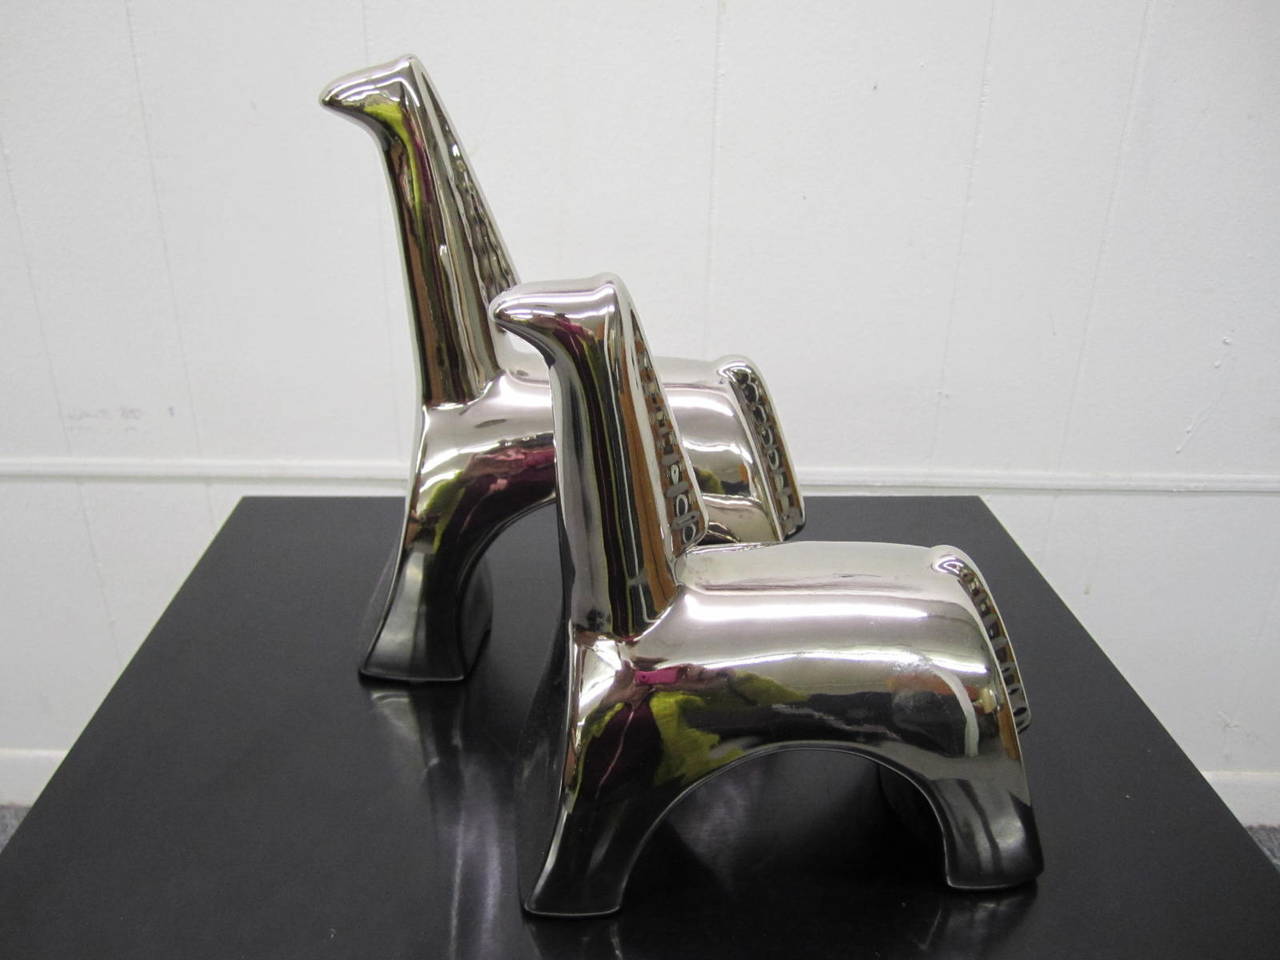 Minimalist Modern Ceramic Horses with Mirrored Metallic Glaze by California based pottery studio Jaru, c1970. Pieces are in excellent condition with normal wear.